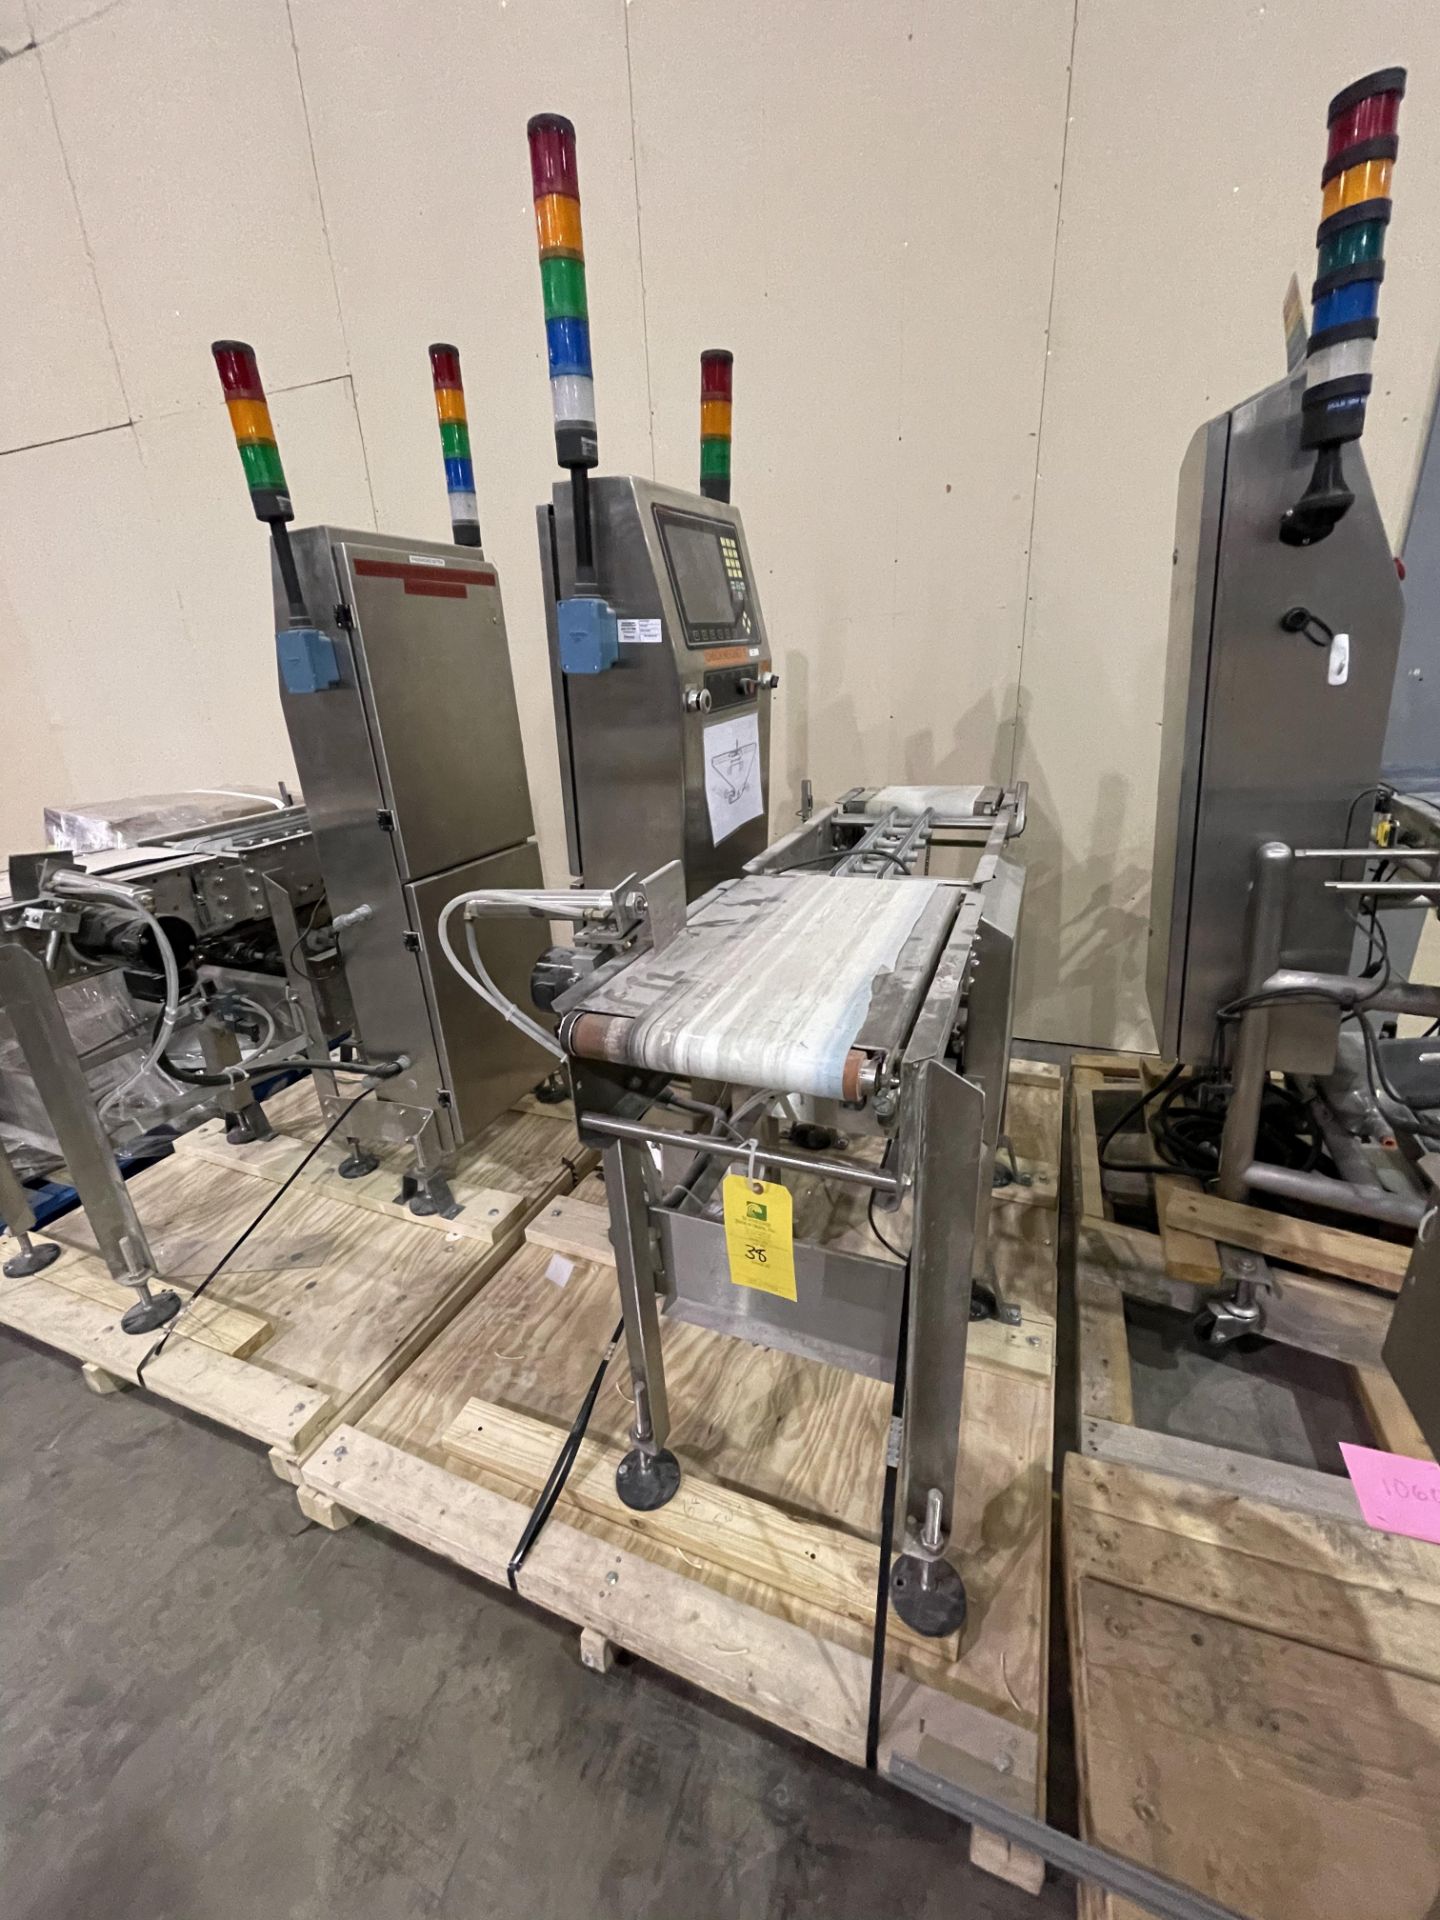 Thermo Ramsey Checkweigher Model AC9000(P)-8120 S/N 0802735 Loading/Rigging Fee $100